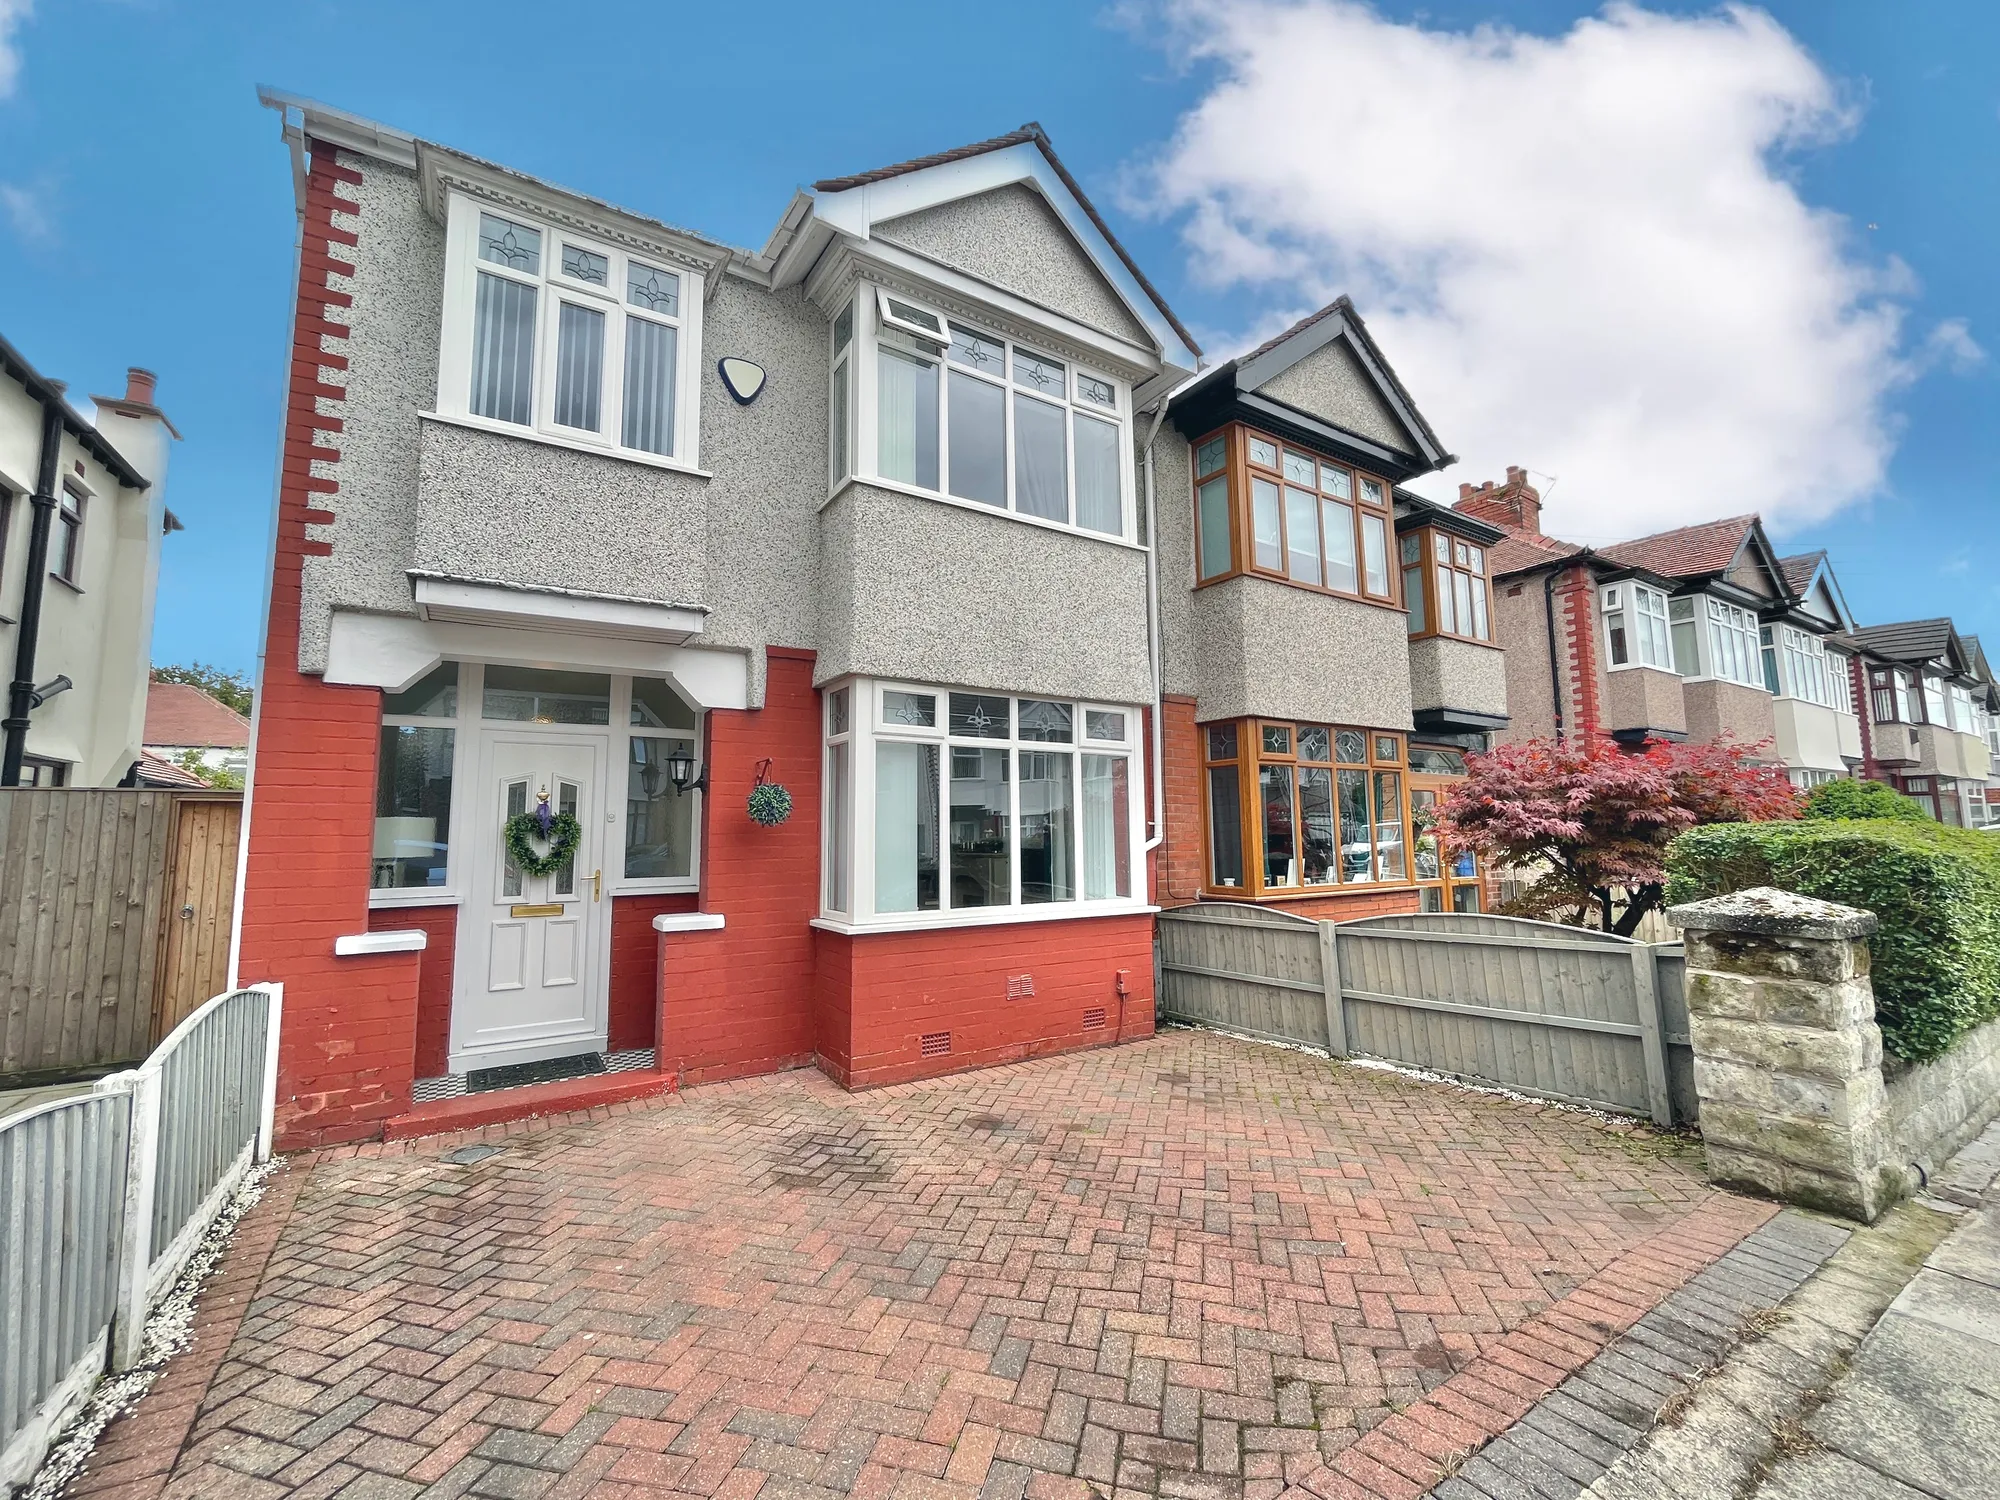 Who is looking for a spacious family home in Crosby at a great price? We have just the thing for you! Check out the floorplan on this charming four-bedroom semi-detached property situated in the heart of Crosby.